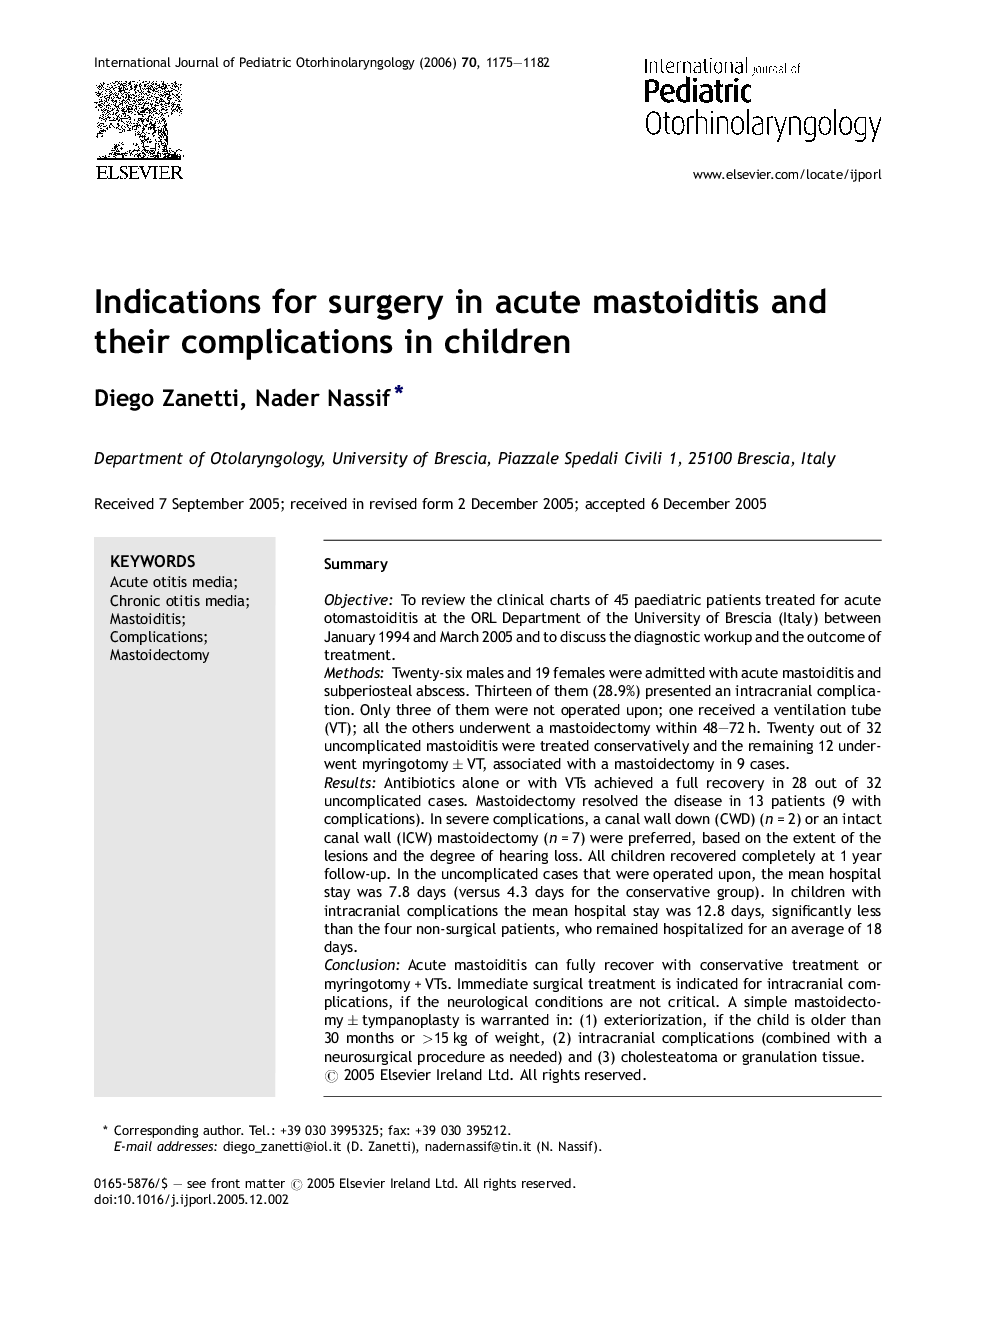 Indications for surgery in acute mastoiditis and their complications in children